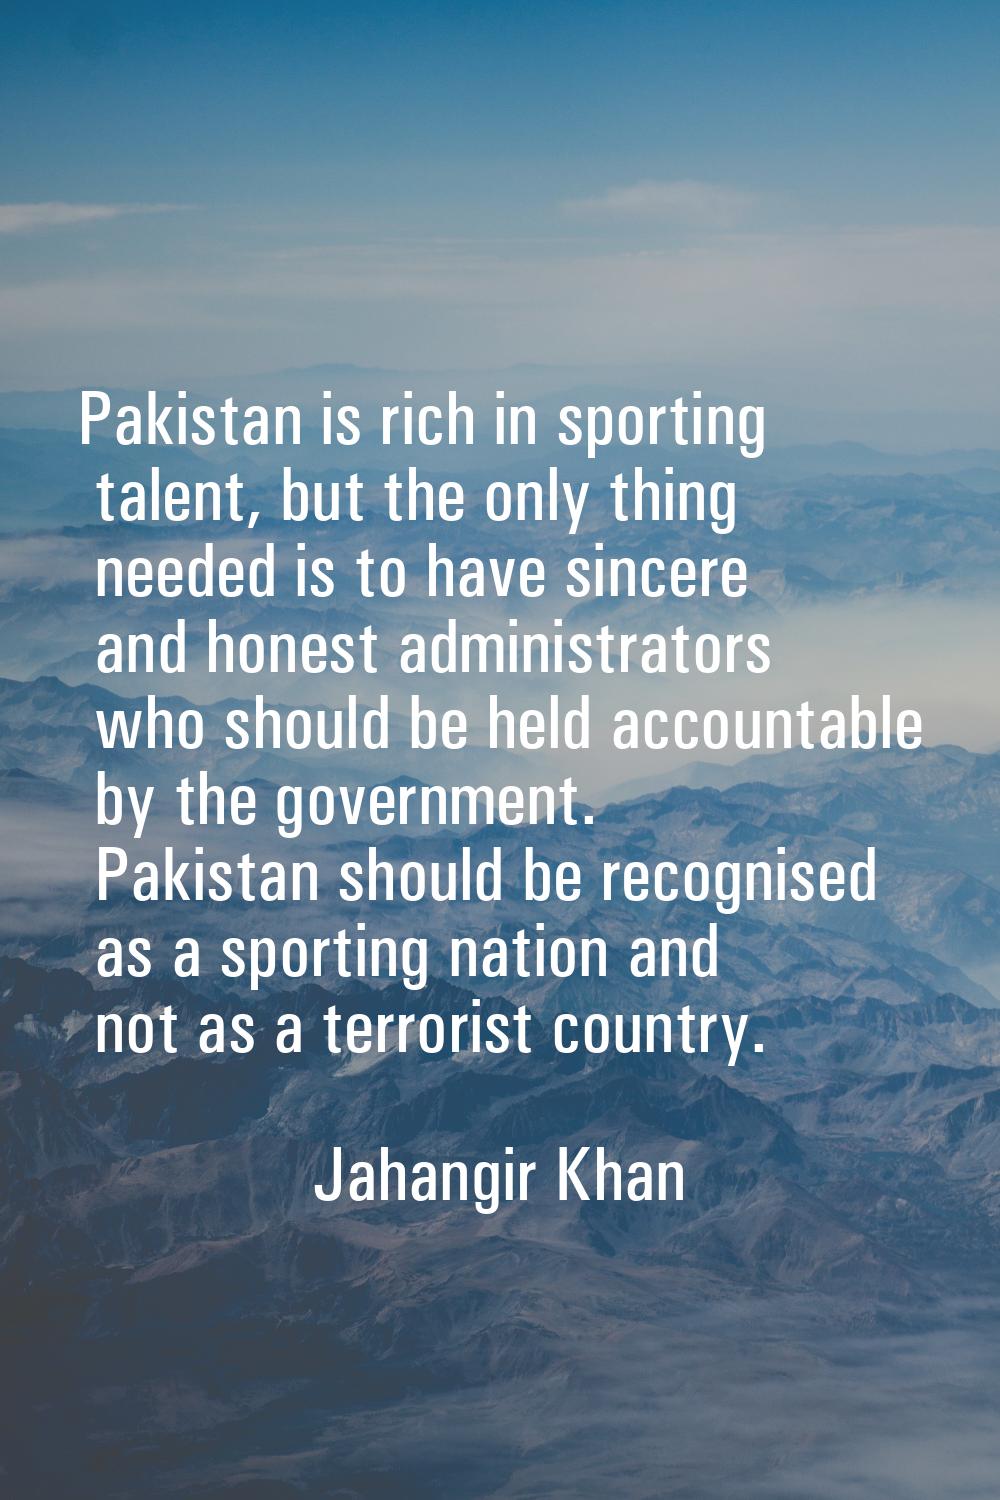 Pakistan is rich in sporting talent, but the only thing needed is to have sincere and honest admini